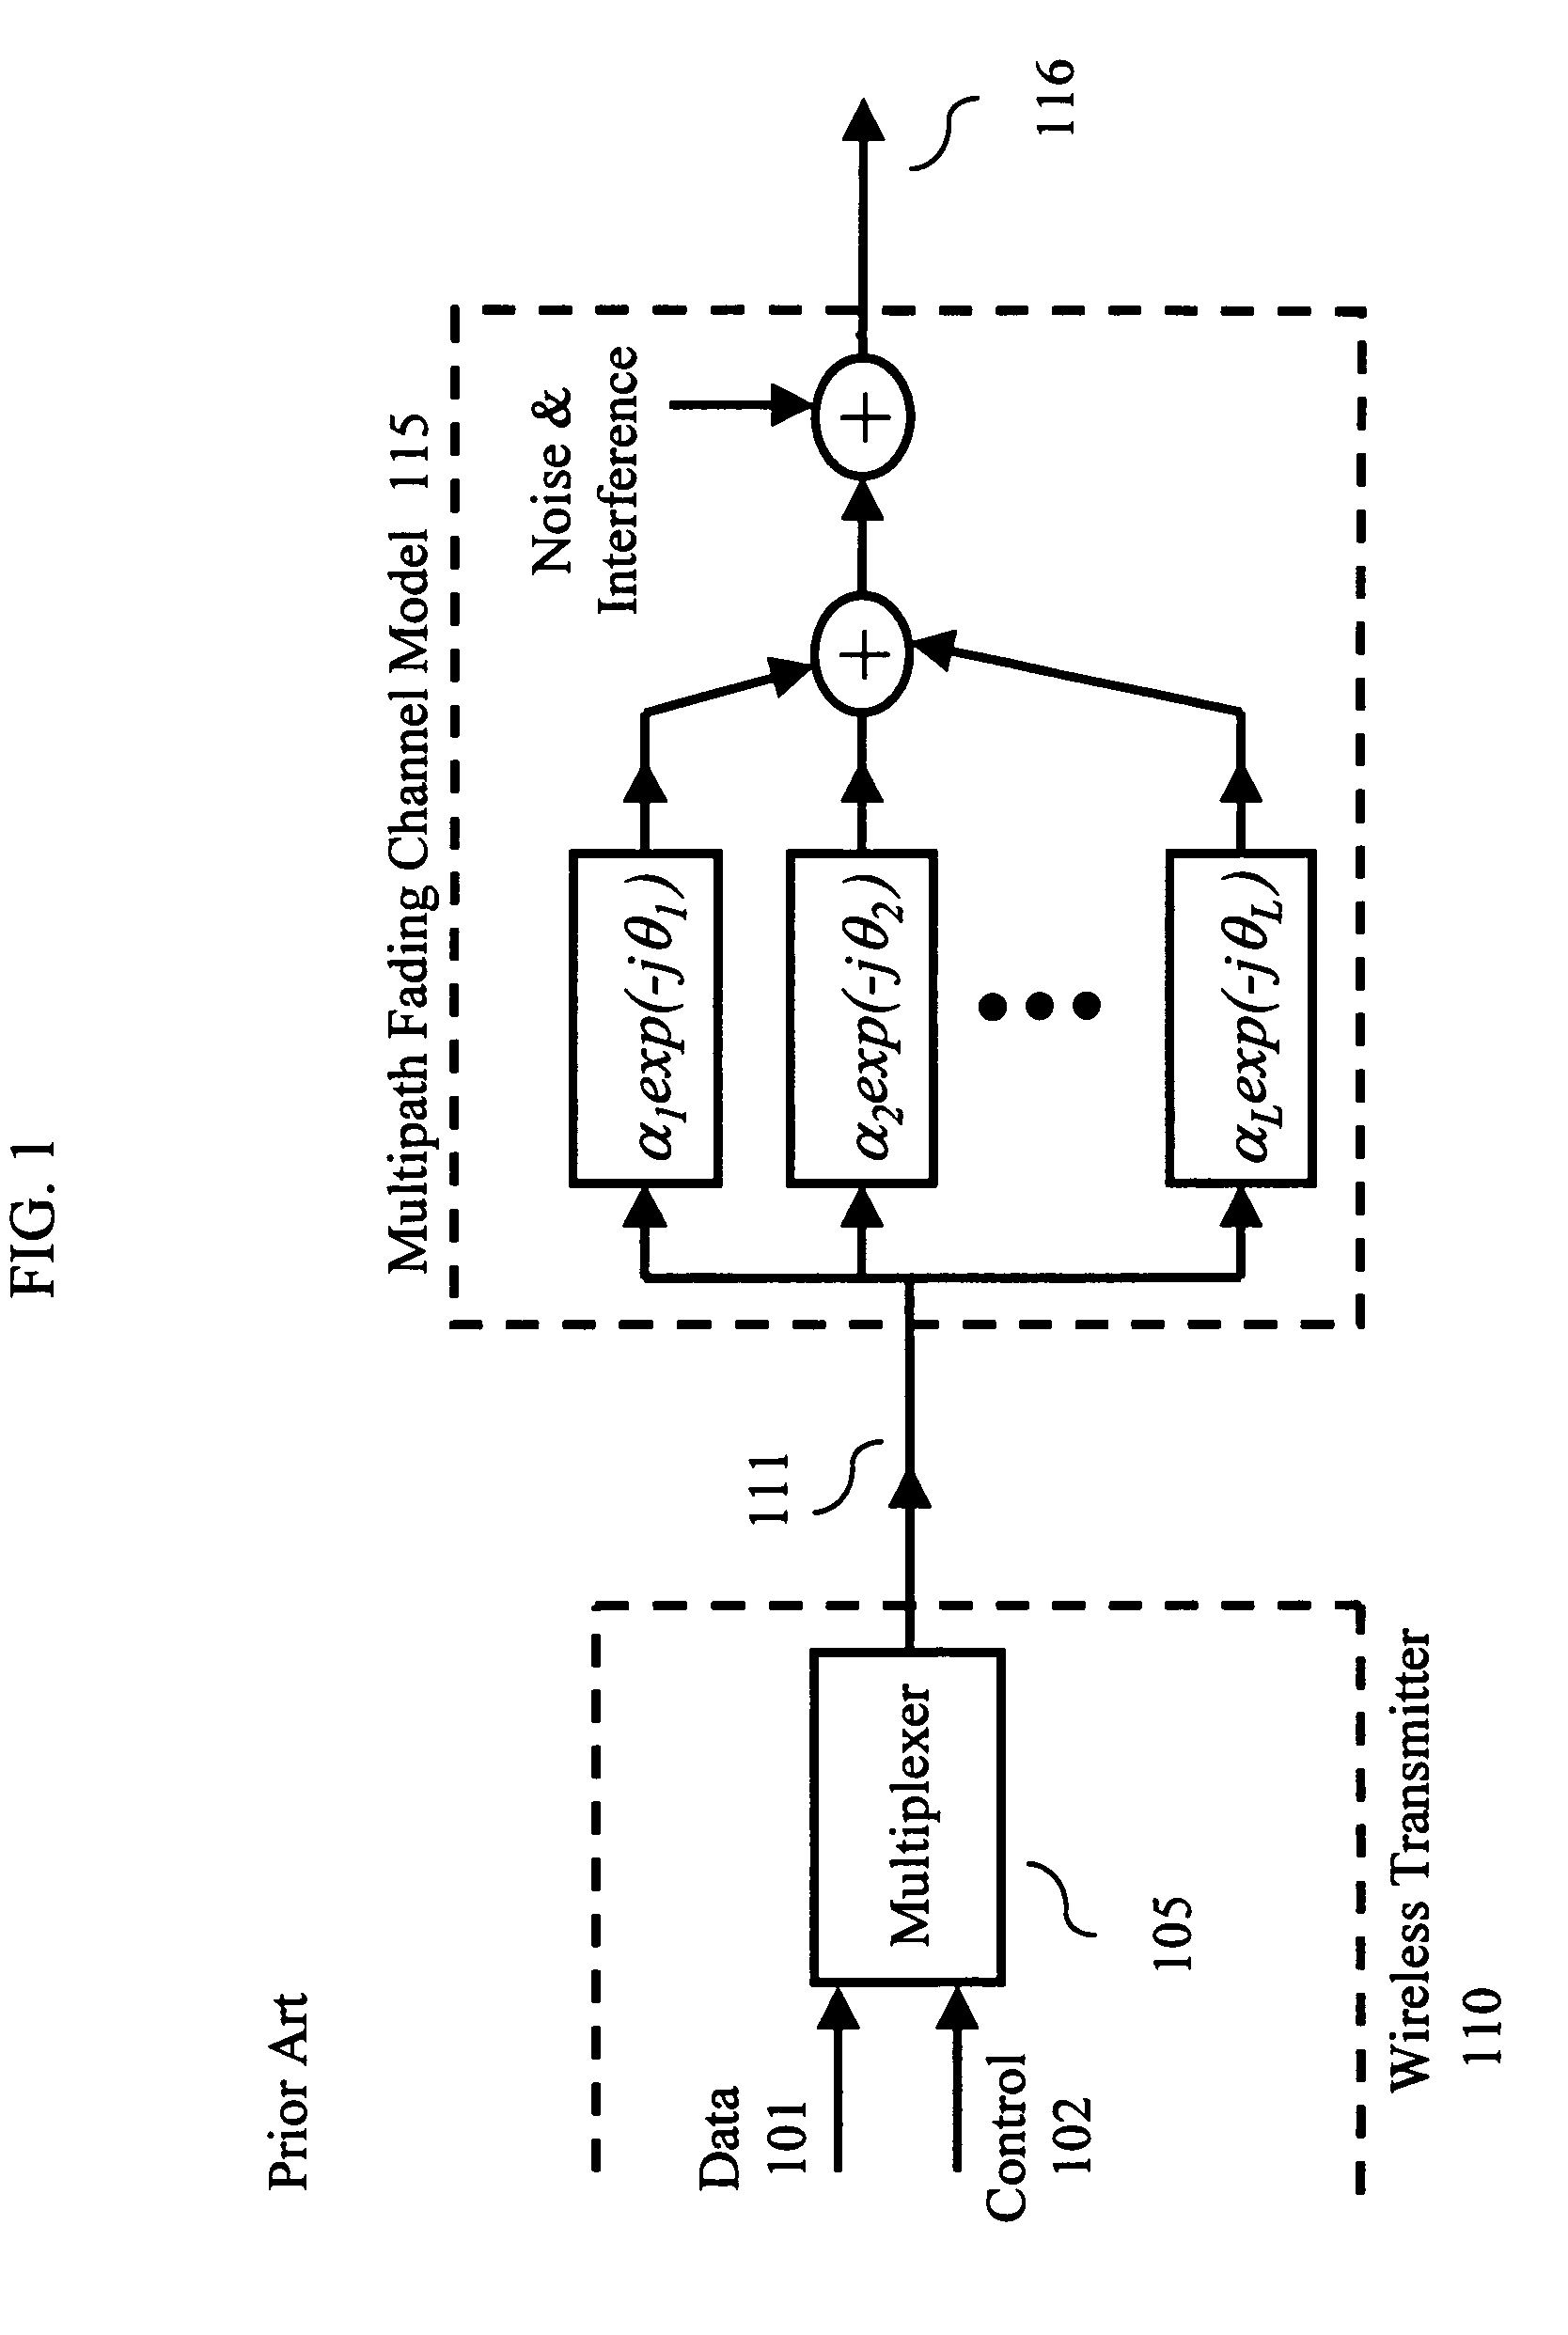 Enhanced metric for bit detection on fading channels with unknown statistics